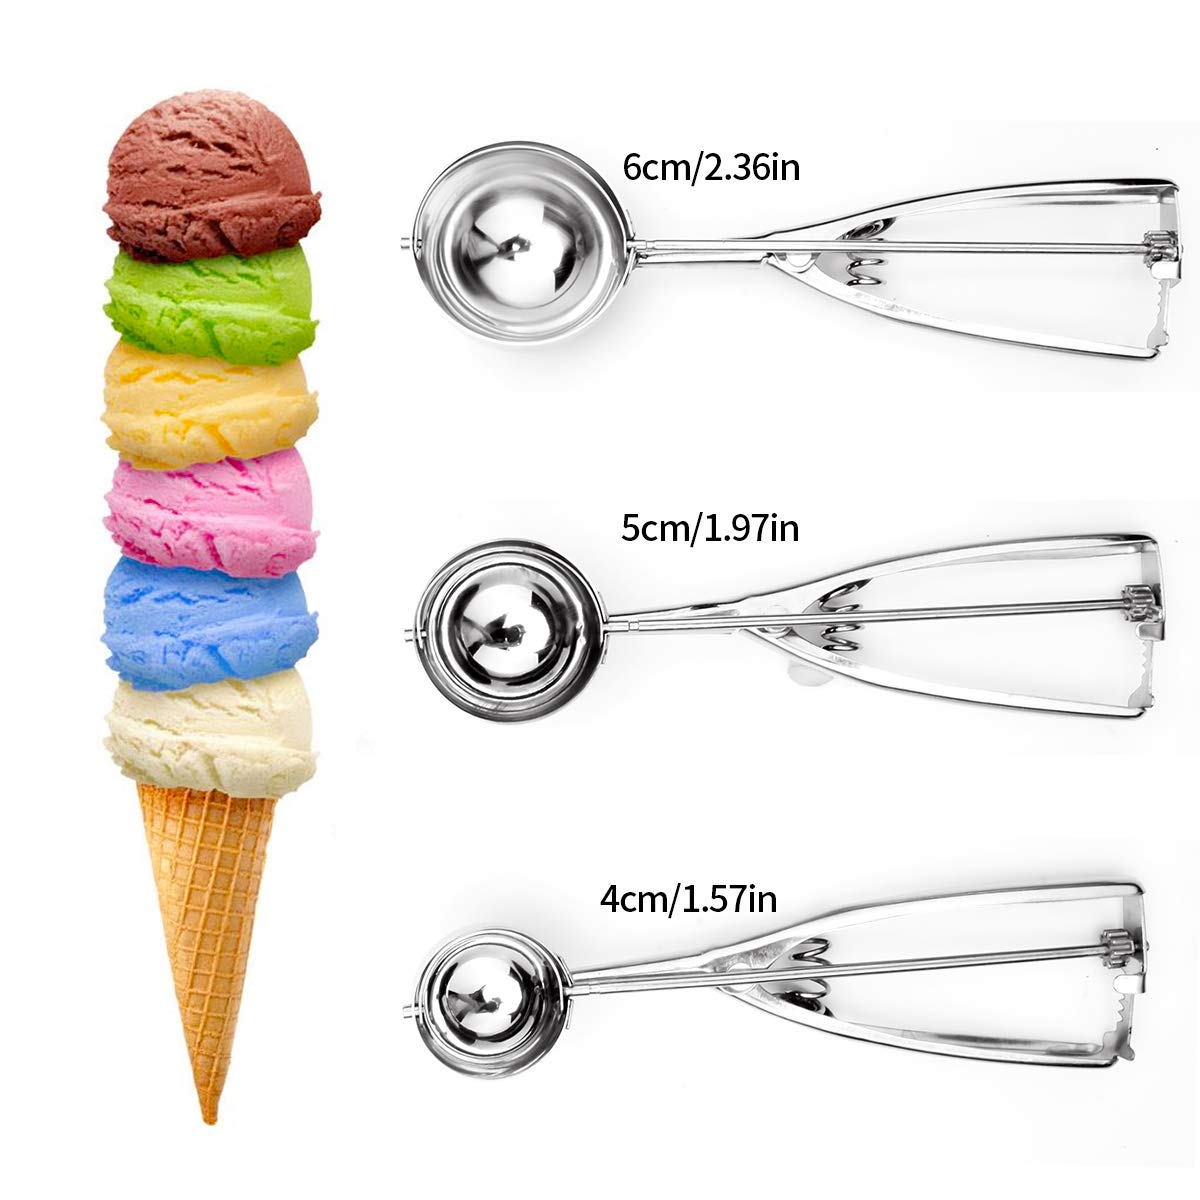 Shxx Ice Cream Scoop, Nonstick Anti-freeze Food Grade Rubber Scooper With  The Hung Hole Design, Comfortable Handle B916-257 最大51％オフ！